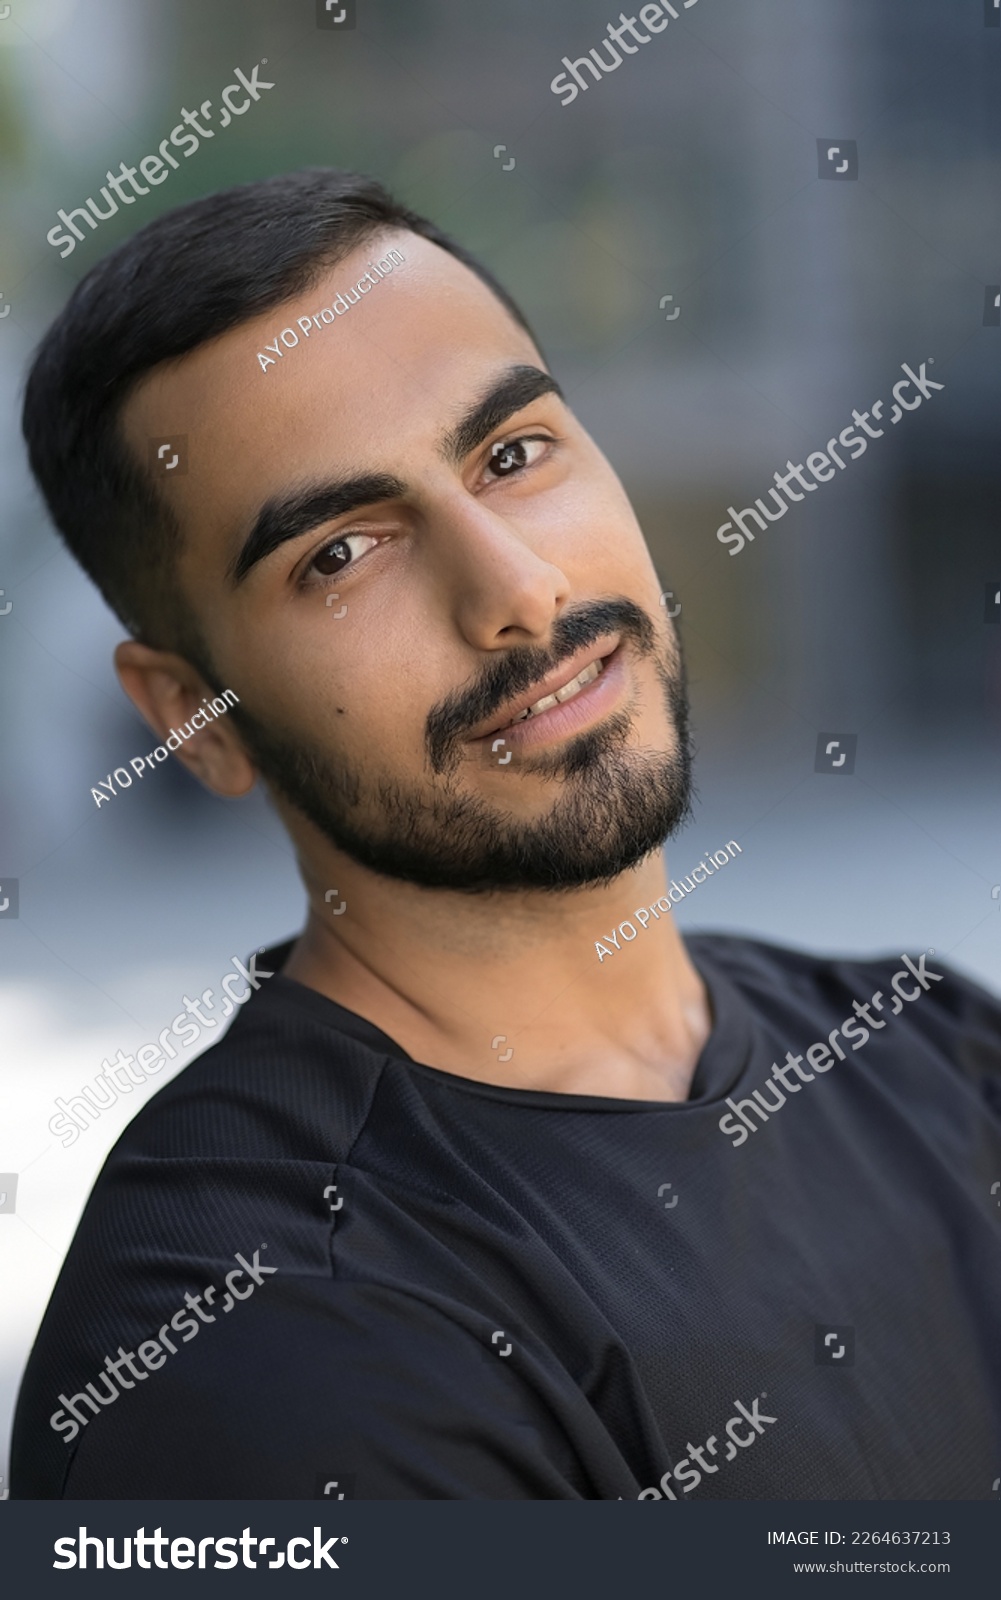 Smiling confident middle eastern man looking at camera on the street. Iranian hipster male with black hair wearing dark clothes standing outdoor  #2264637213